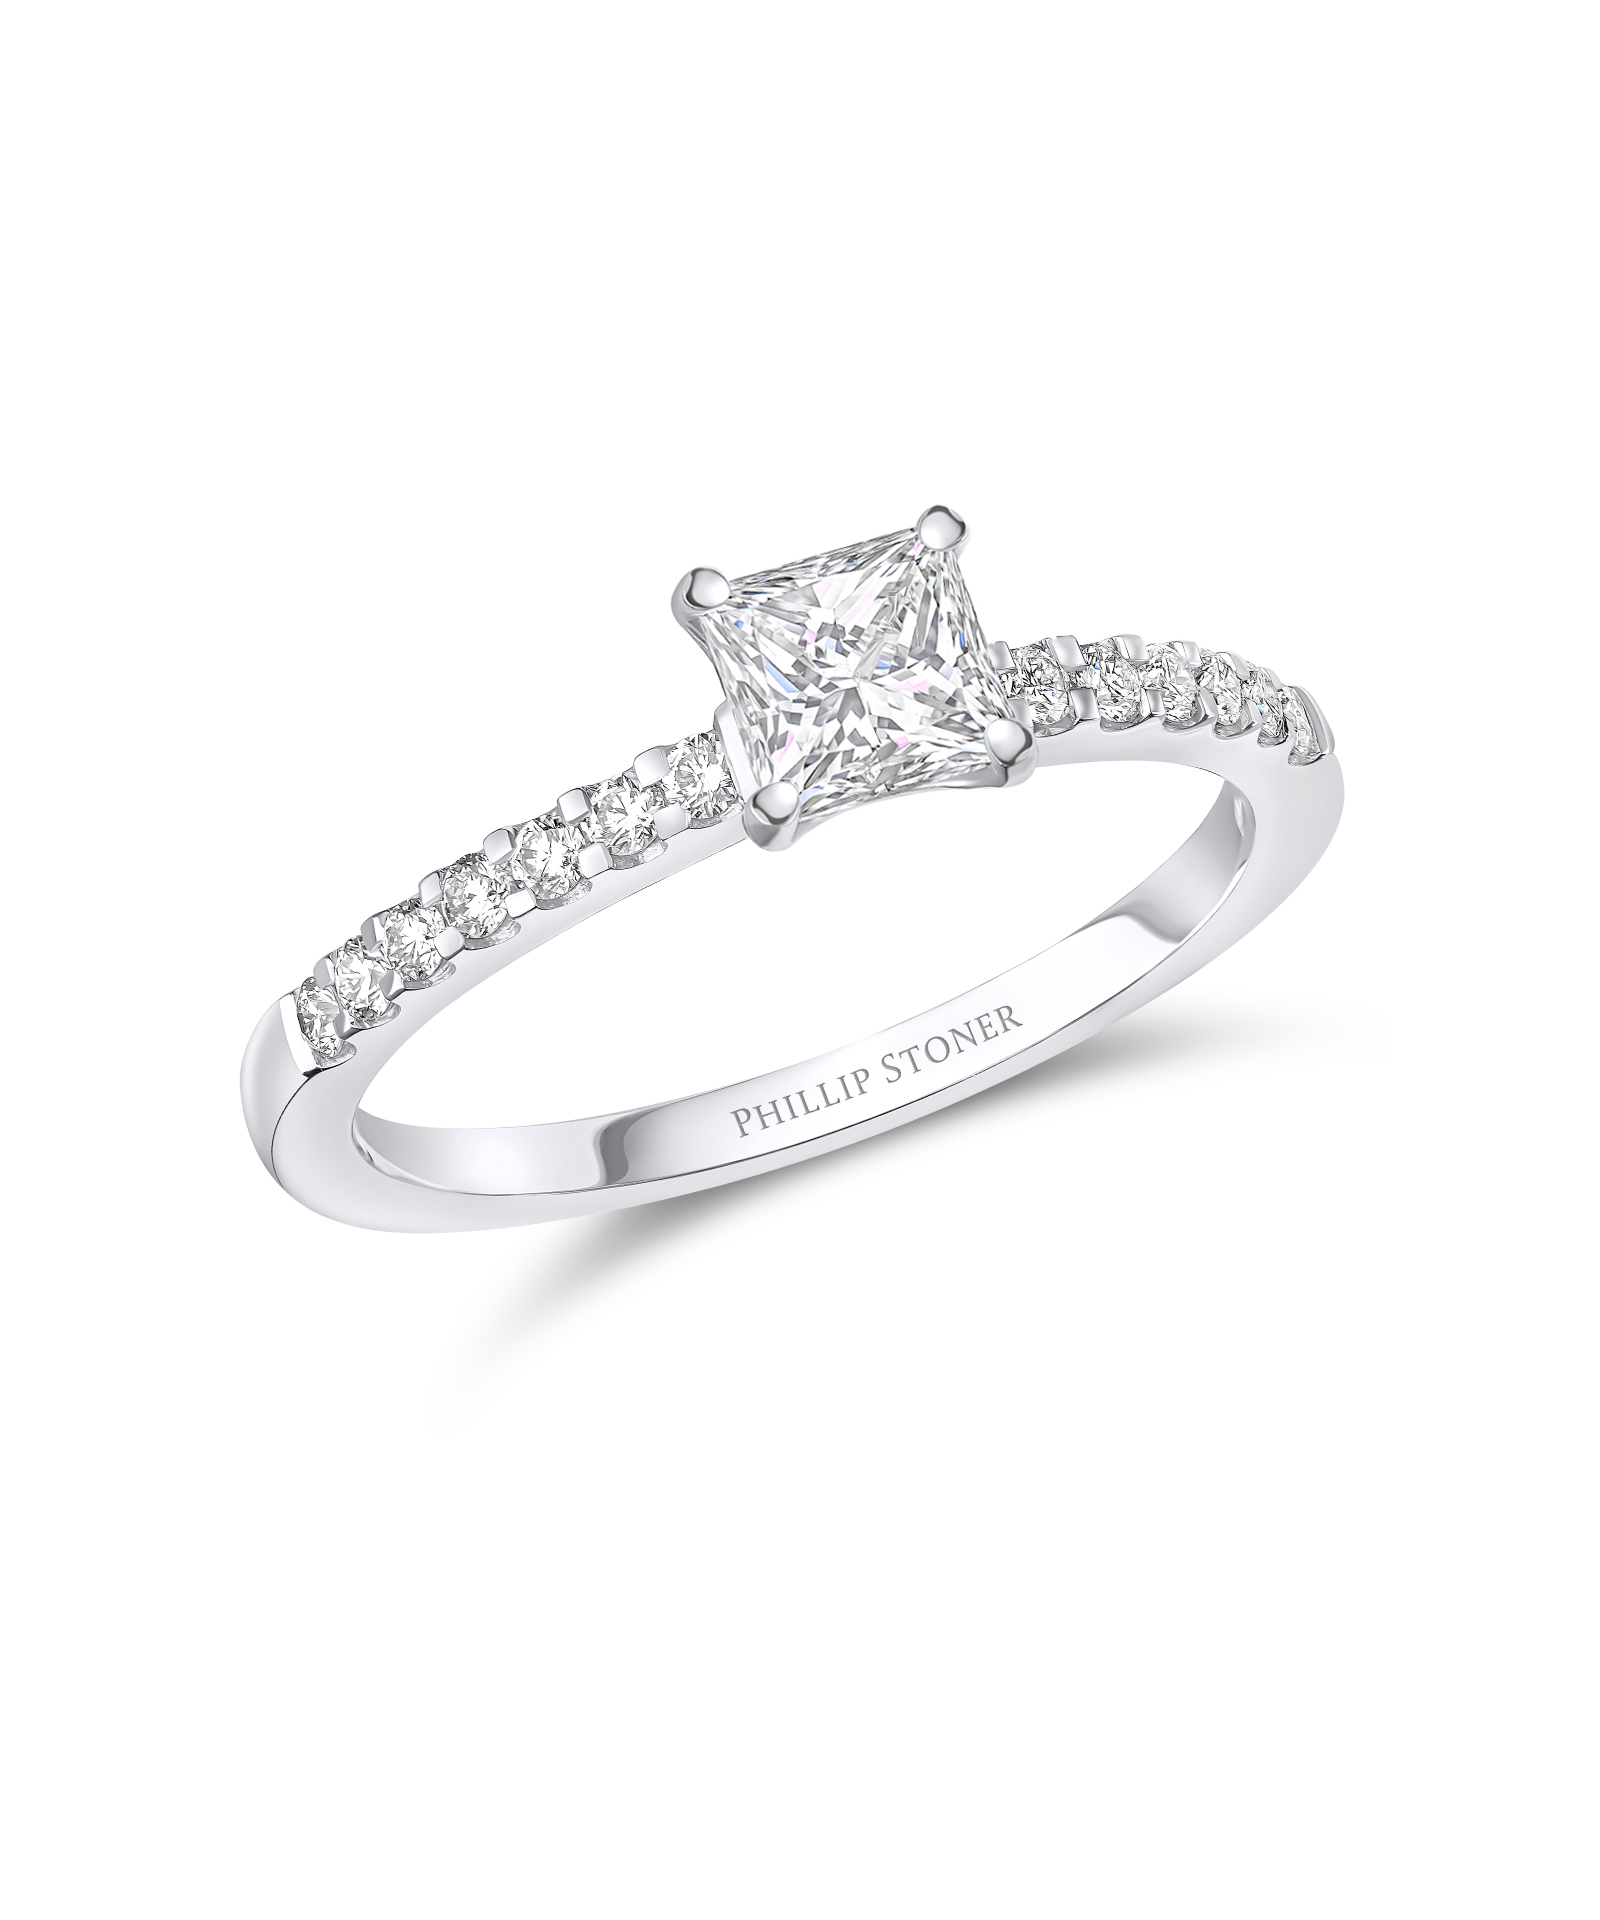 0.50ct Princess Cut Diamond Ring with Scallop Set Shoulders - Phillip Stoner The Jeweller